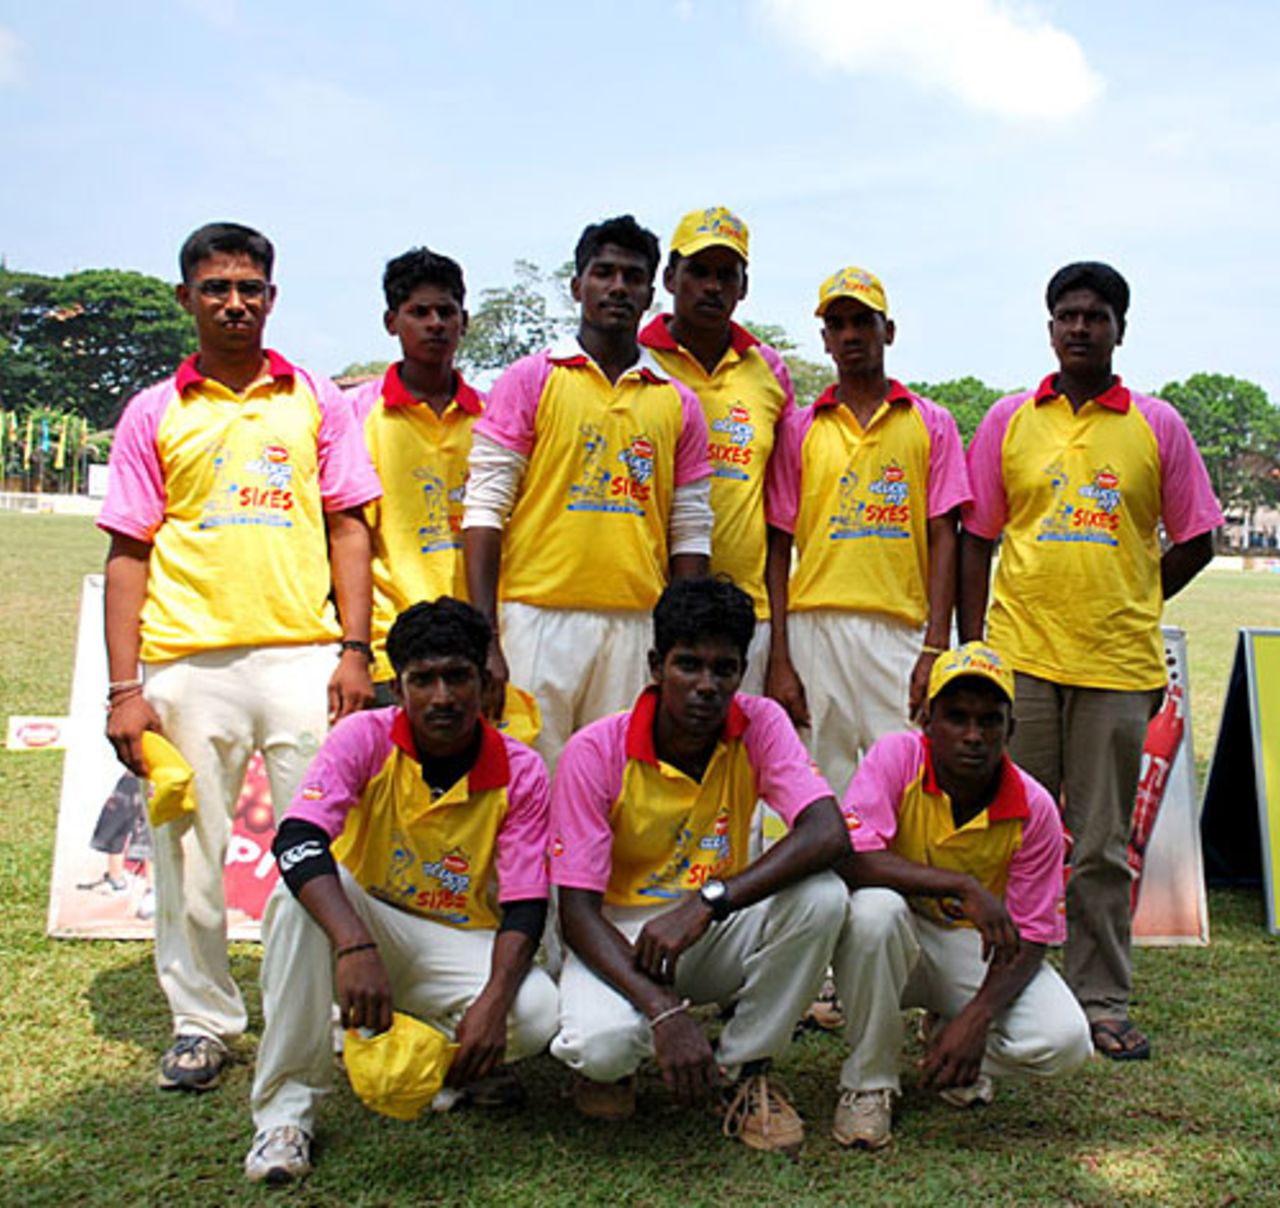 The Trinacomalee district school team poses for photos, Glucofit Cricket Sixes, Colombo, October 17, 2009